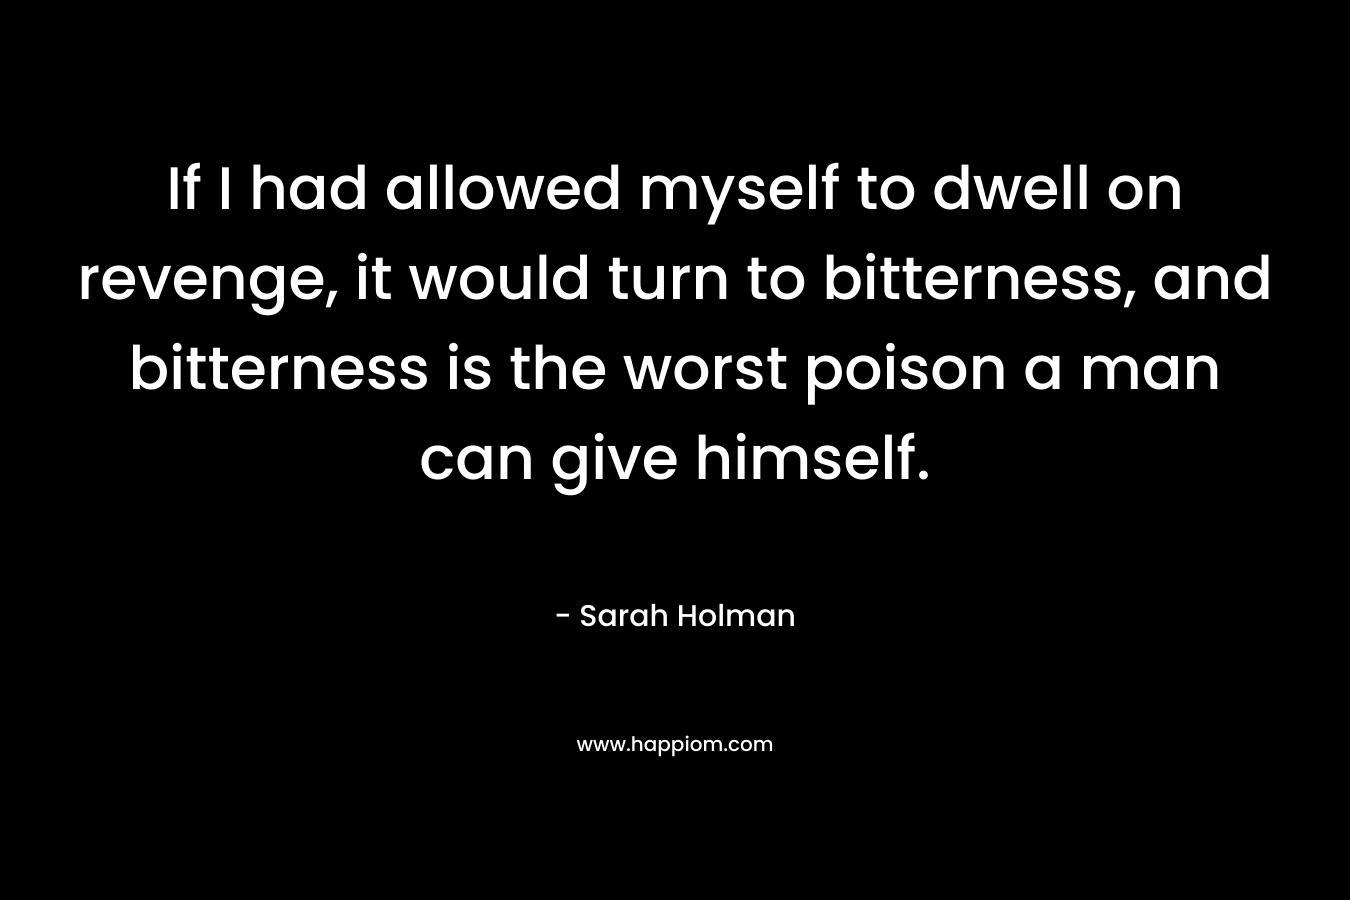 If I had allowed myself to dwell on revenge, it would turn to bitterness, and bitterness is the worst poison a man can give himself. – Sarah Holman